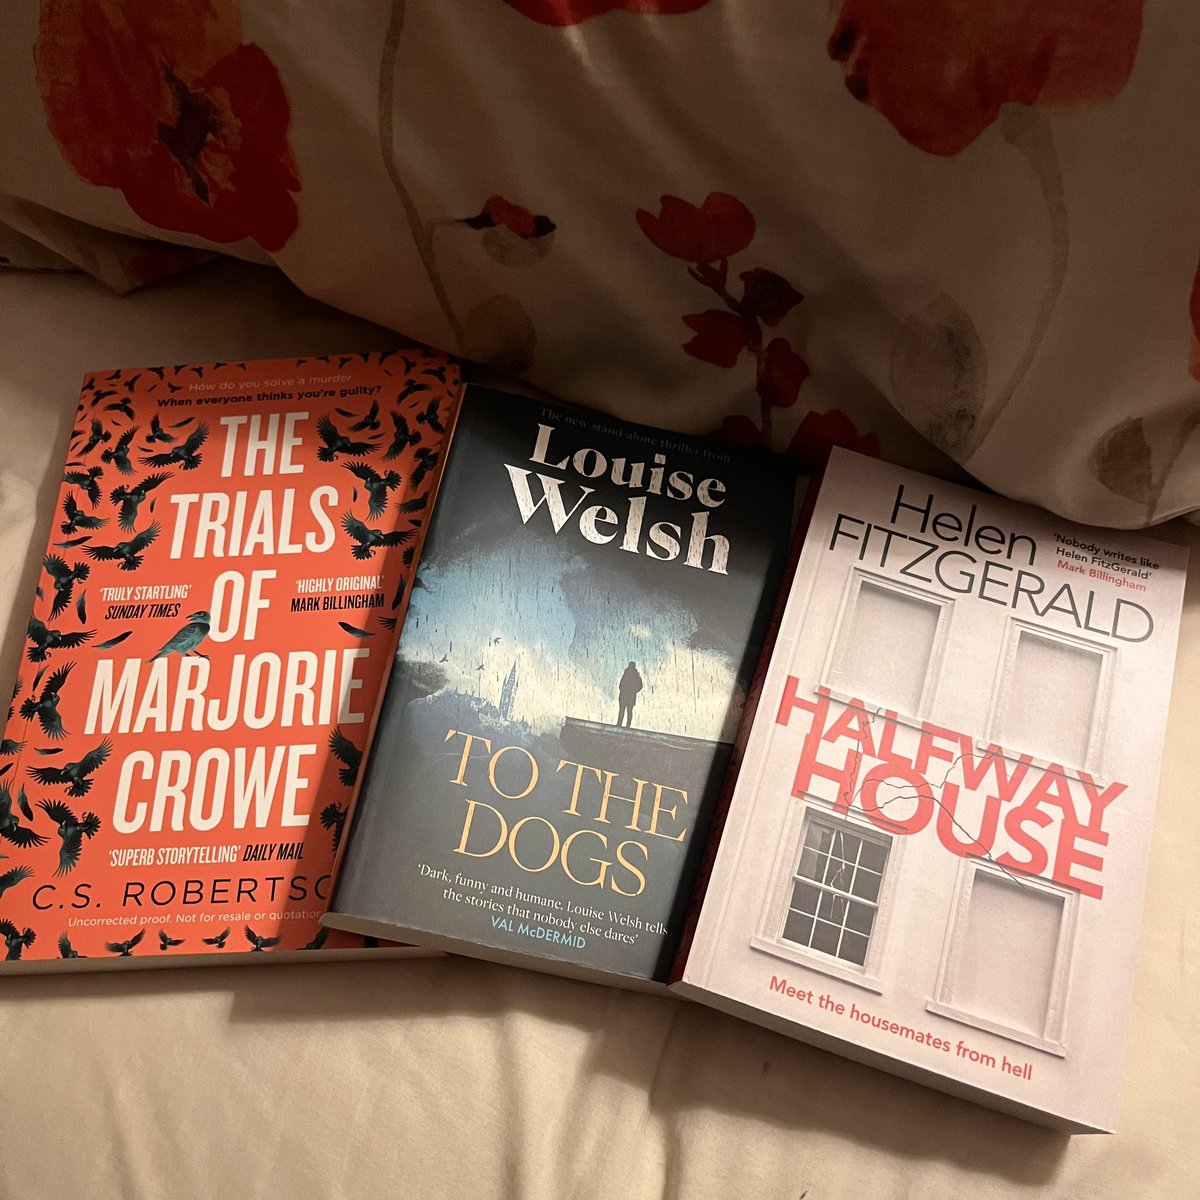 You wait ages for book birthdays then three come along at once.

Happy publication day @CraigRobertson_ @louisewelsh00 @fitzhelen 🎉

I am so far behind on my reading 😬

#thetrialsofmarjoriecrowe #tothedogs #halfwayhouse